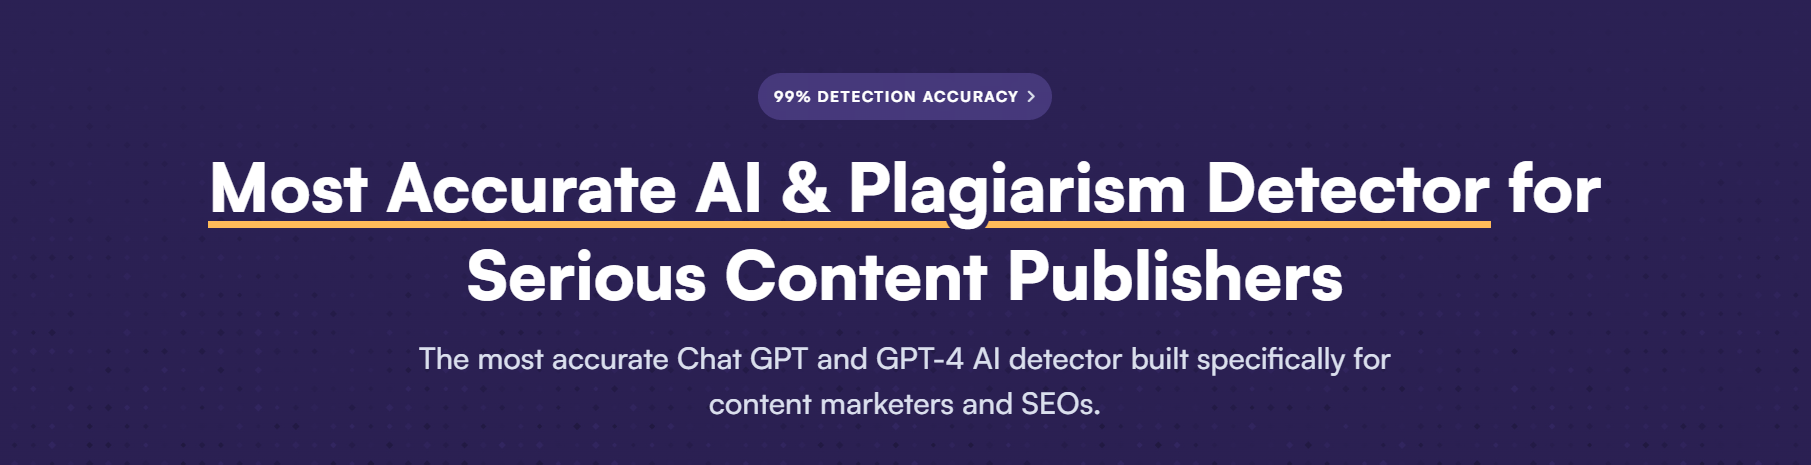 Most Accurate AI & Plagiarism Detector for Serious Content Publishers